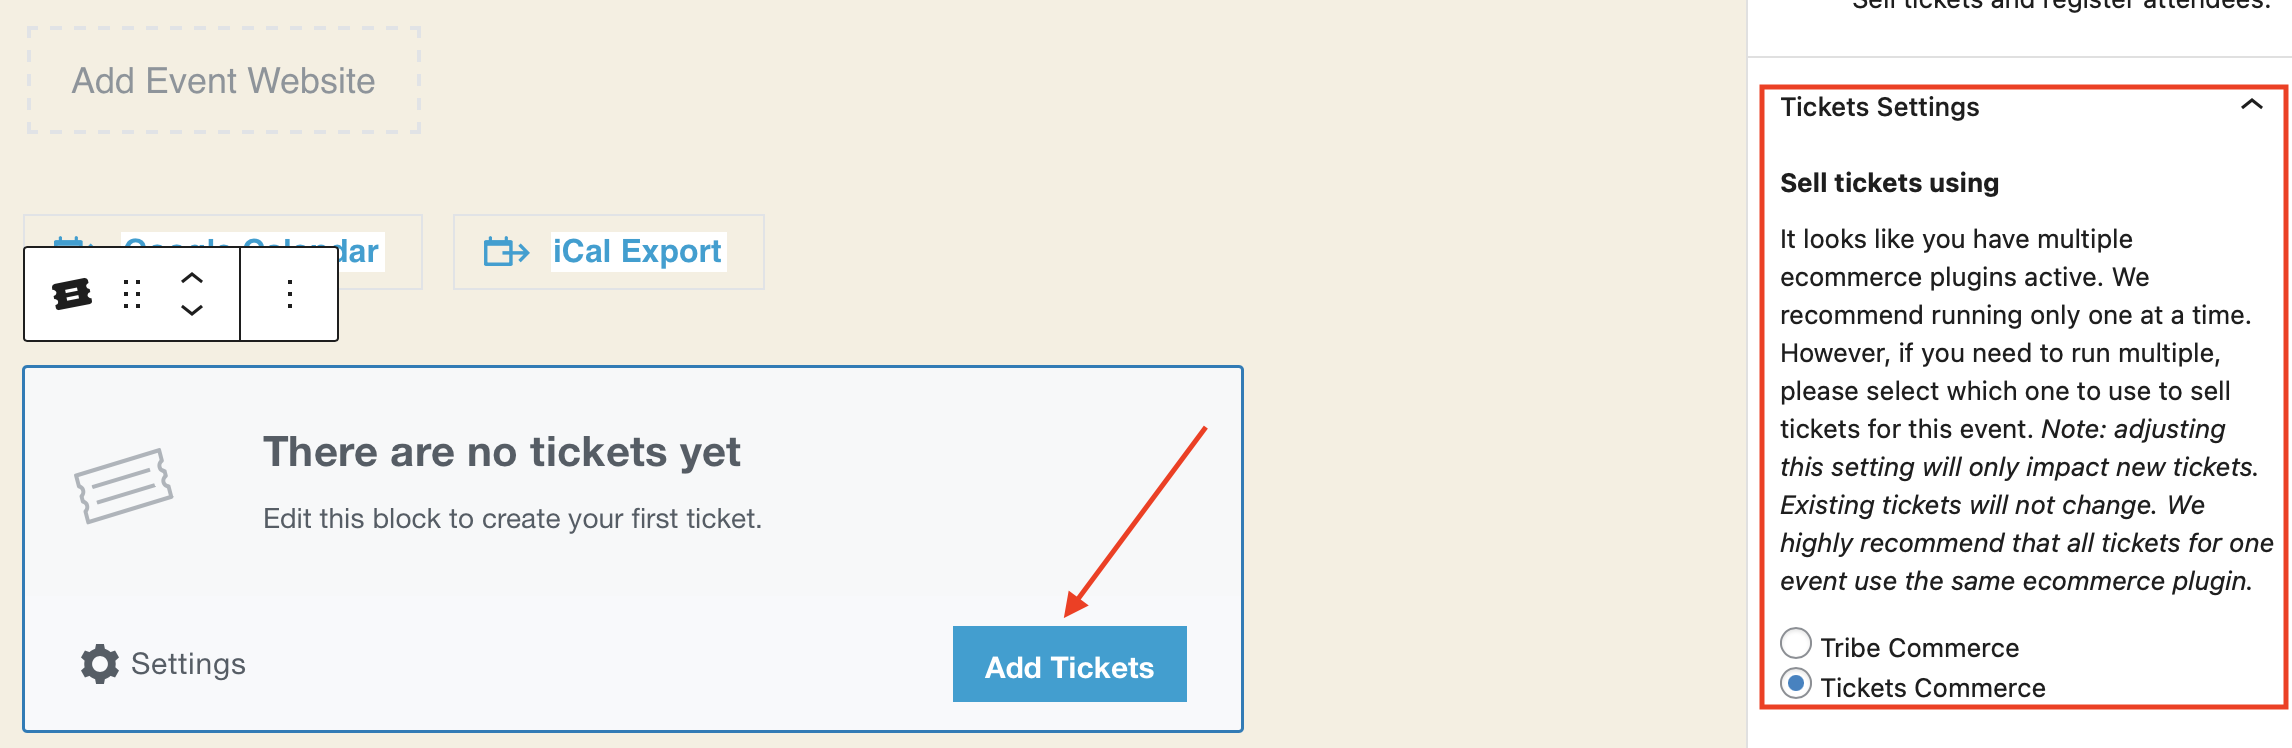 Tickets Settings with Event Tickets Tickets Commerce